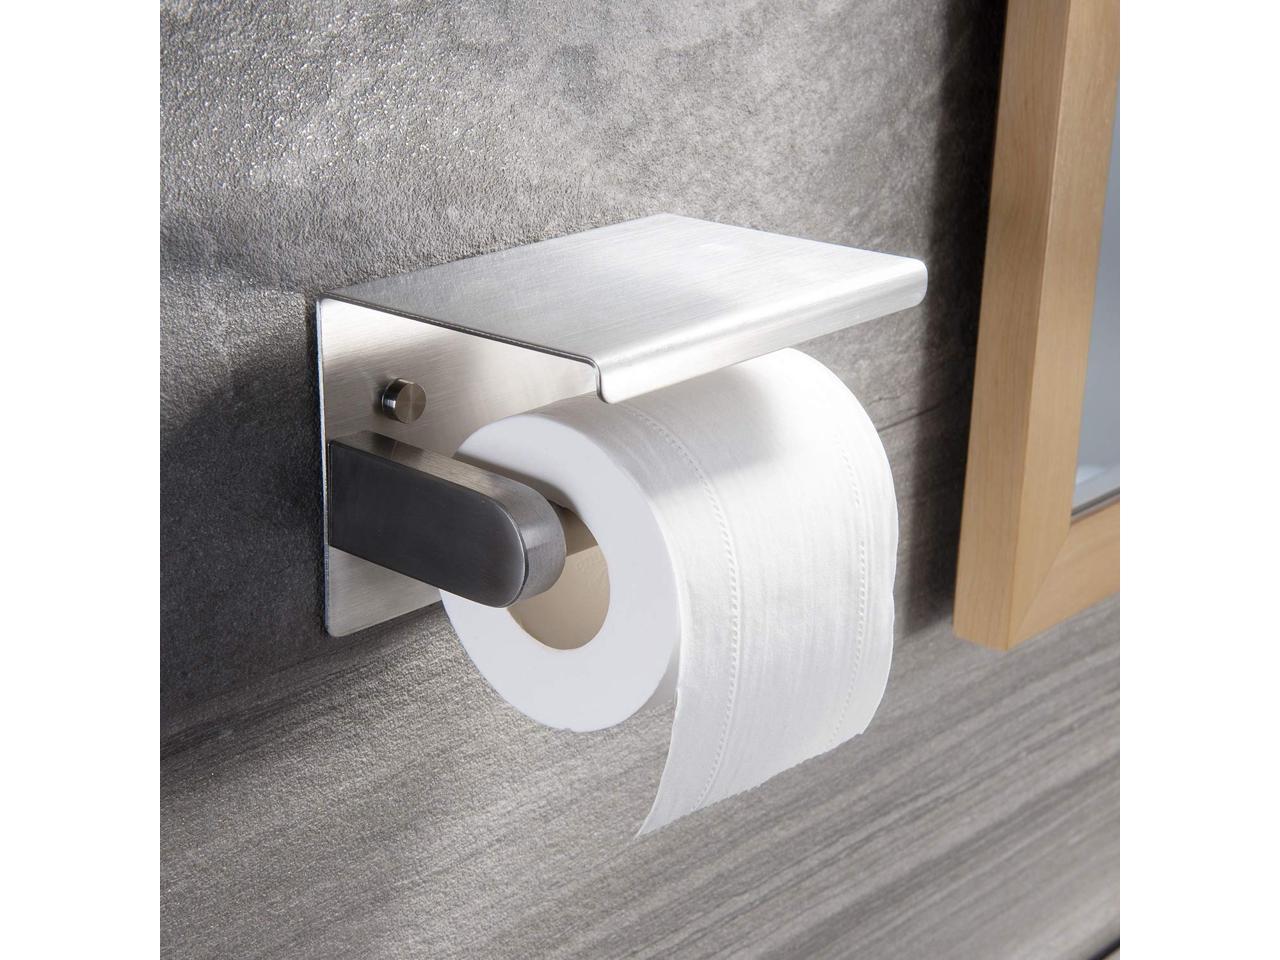 Toilet Paper Holder Stainless Steel Toilet Paper Roll Holder with Shelf Wall Mounted for Bathroom Brushed